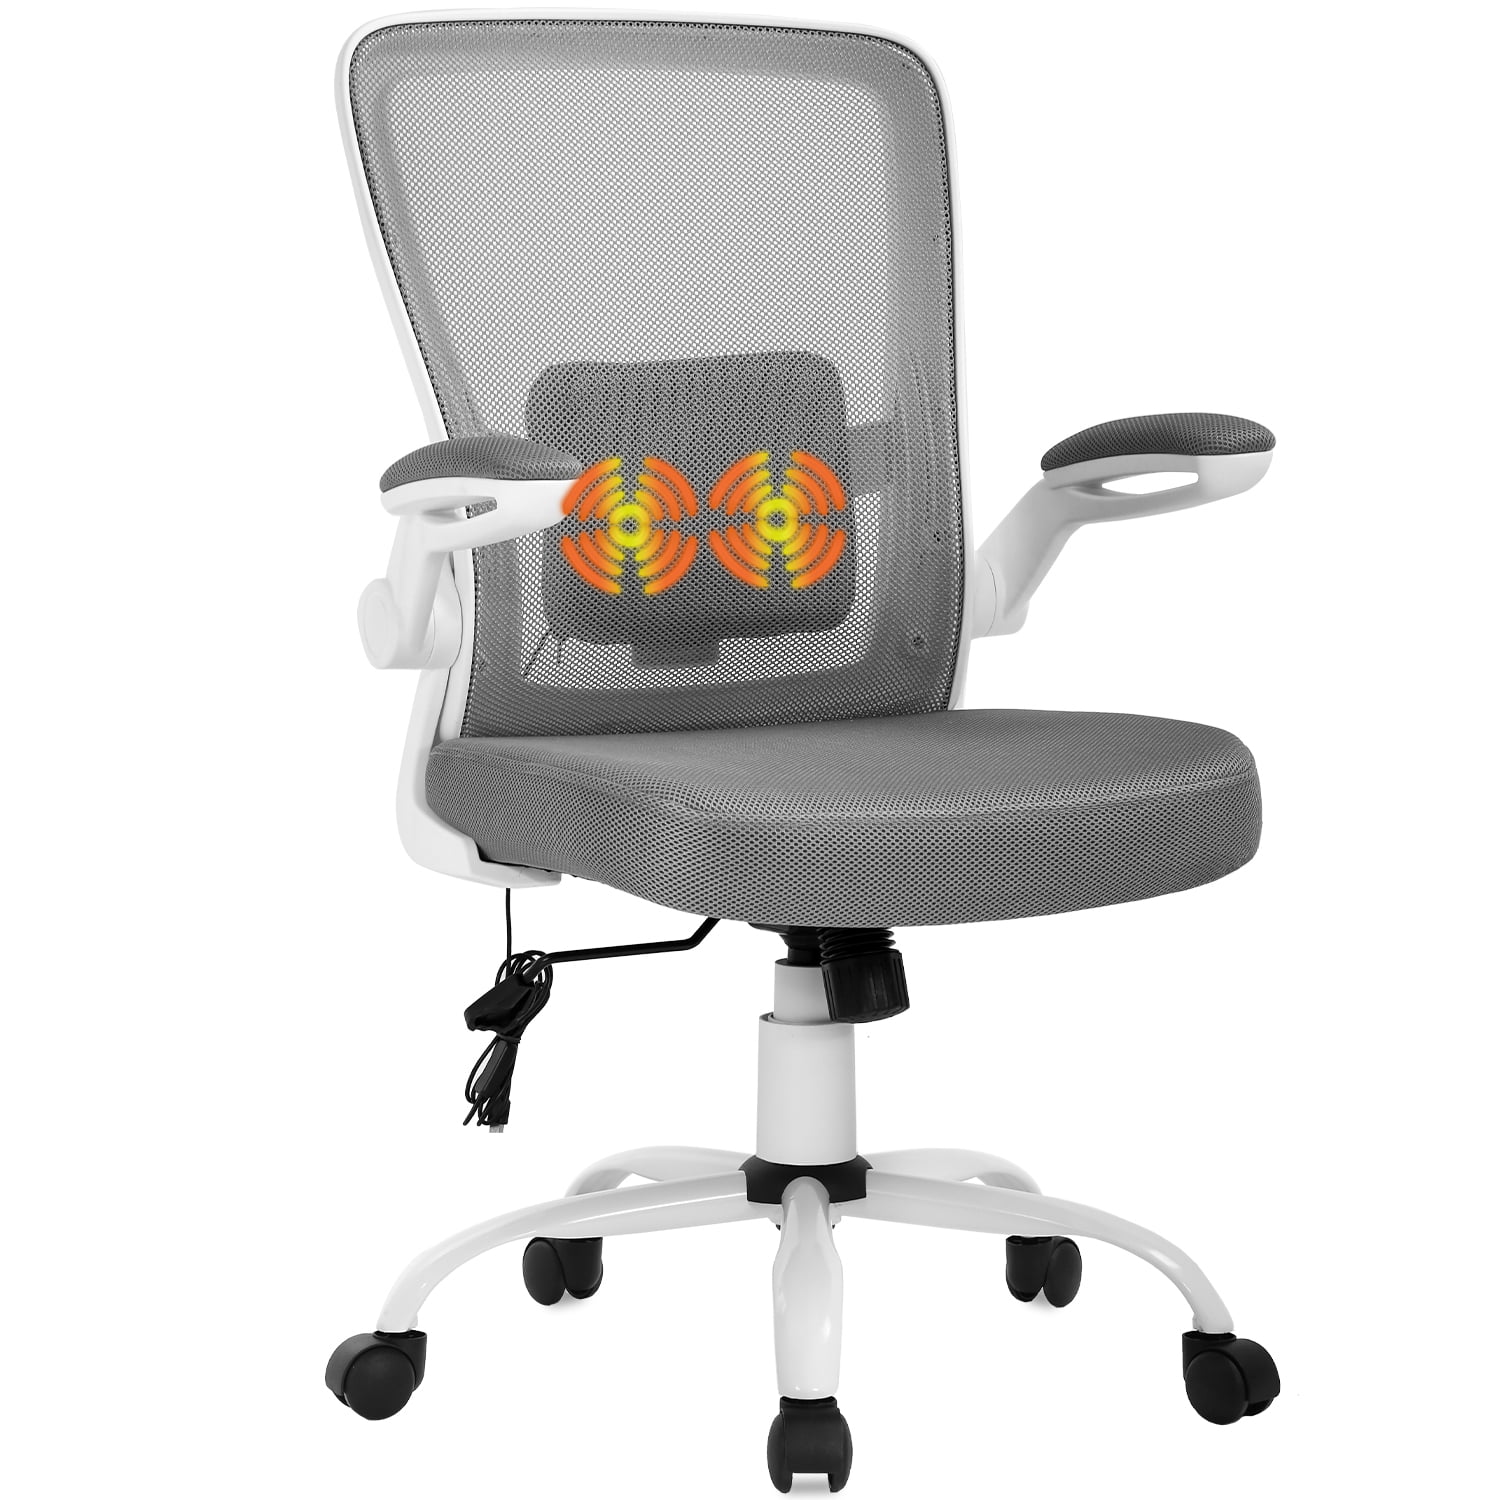 Details about   Ergonomic swivel mesh office chair High-Back Heavy Duty Computer Chair seating 